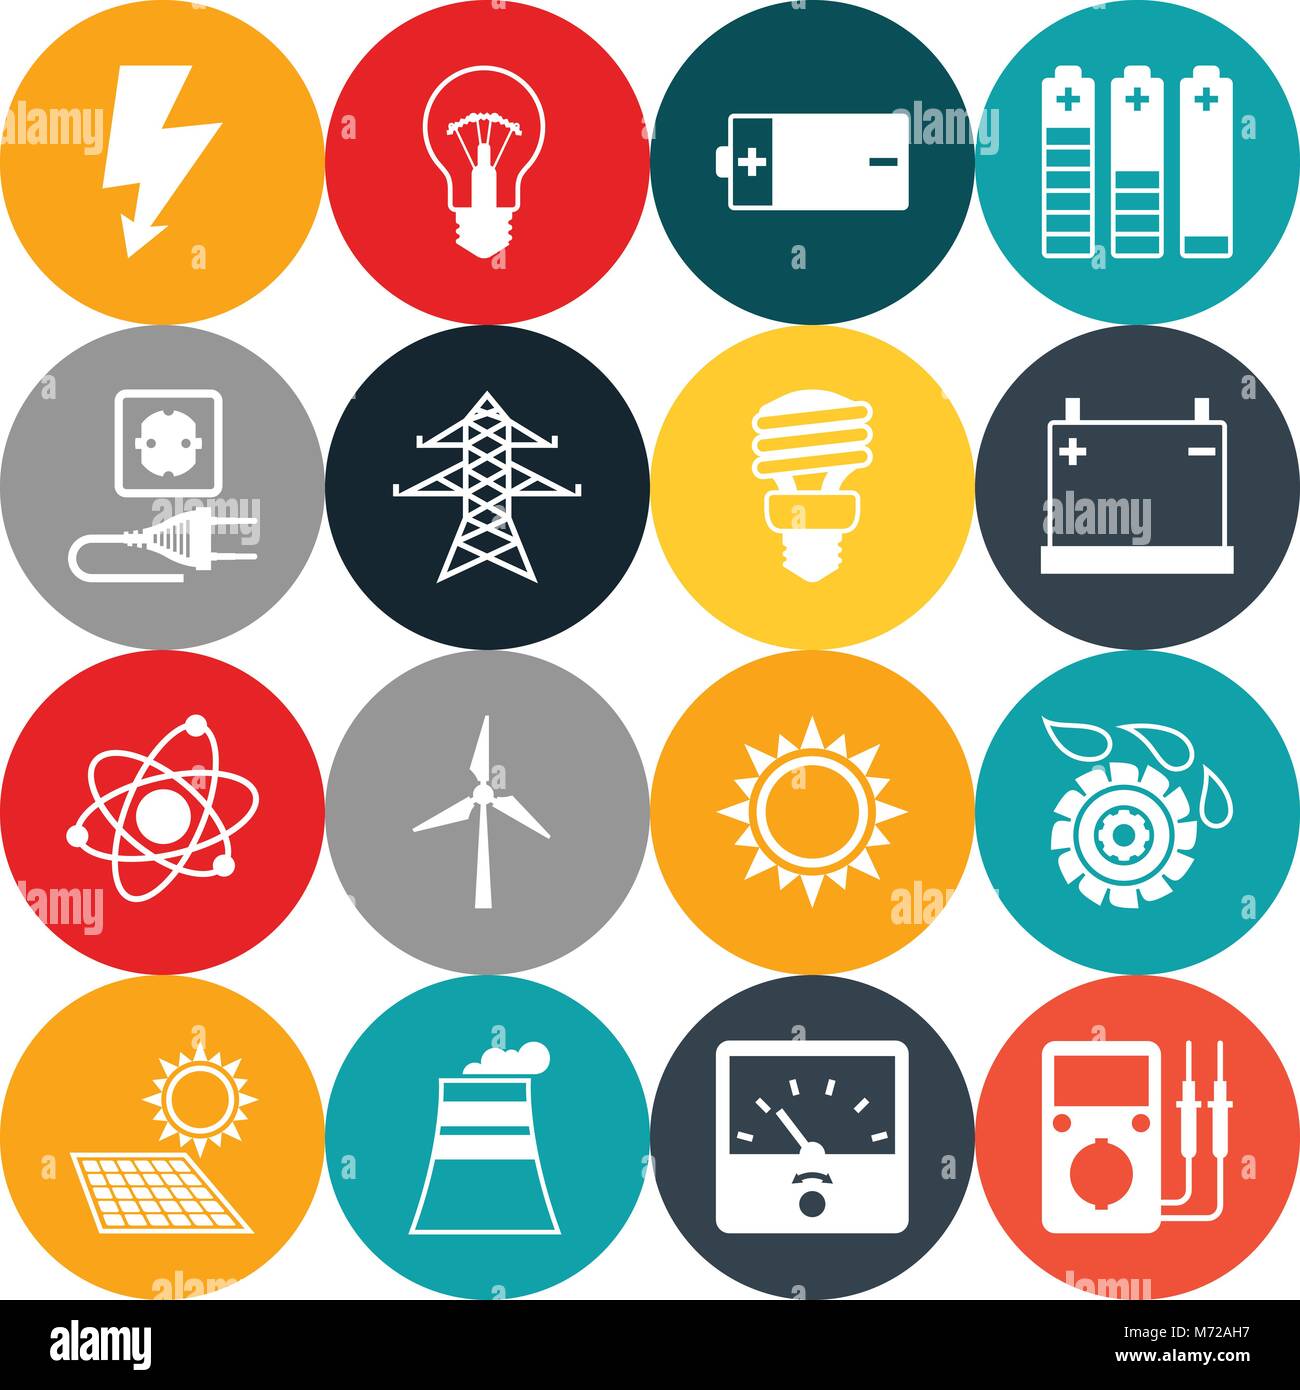 Set of industry power icons in flat design style Stock Vector